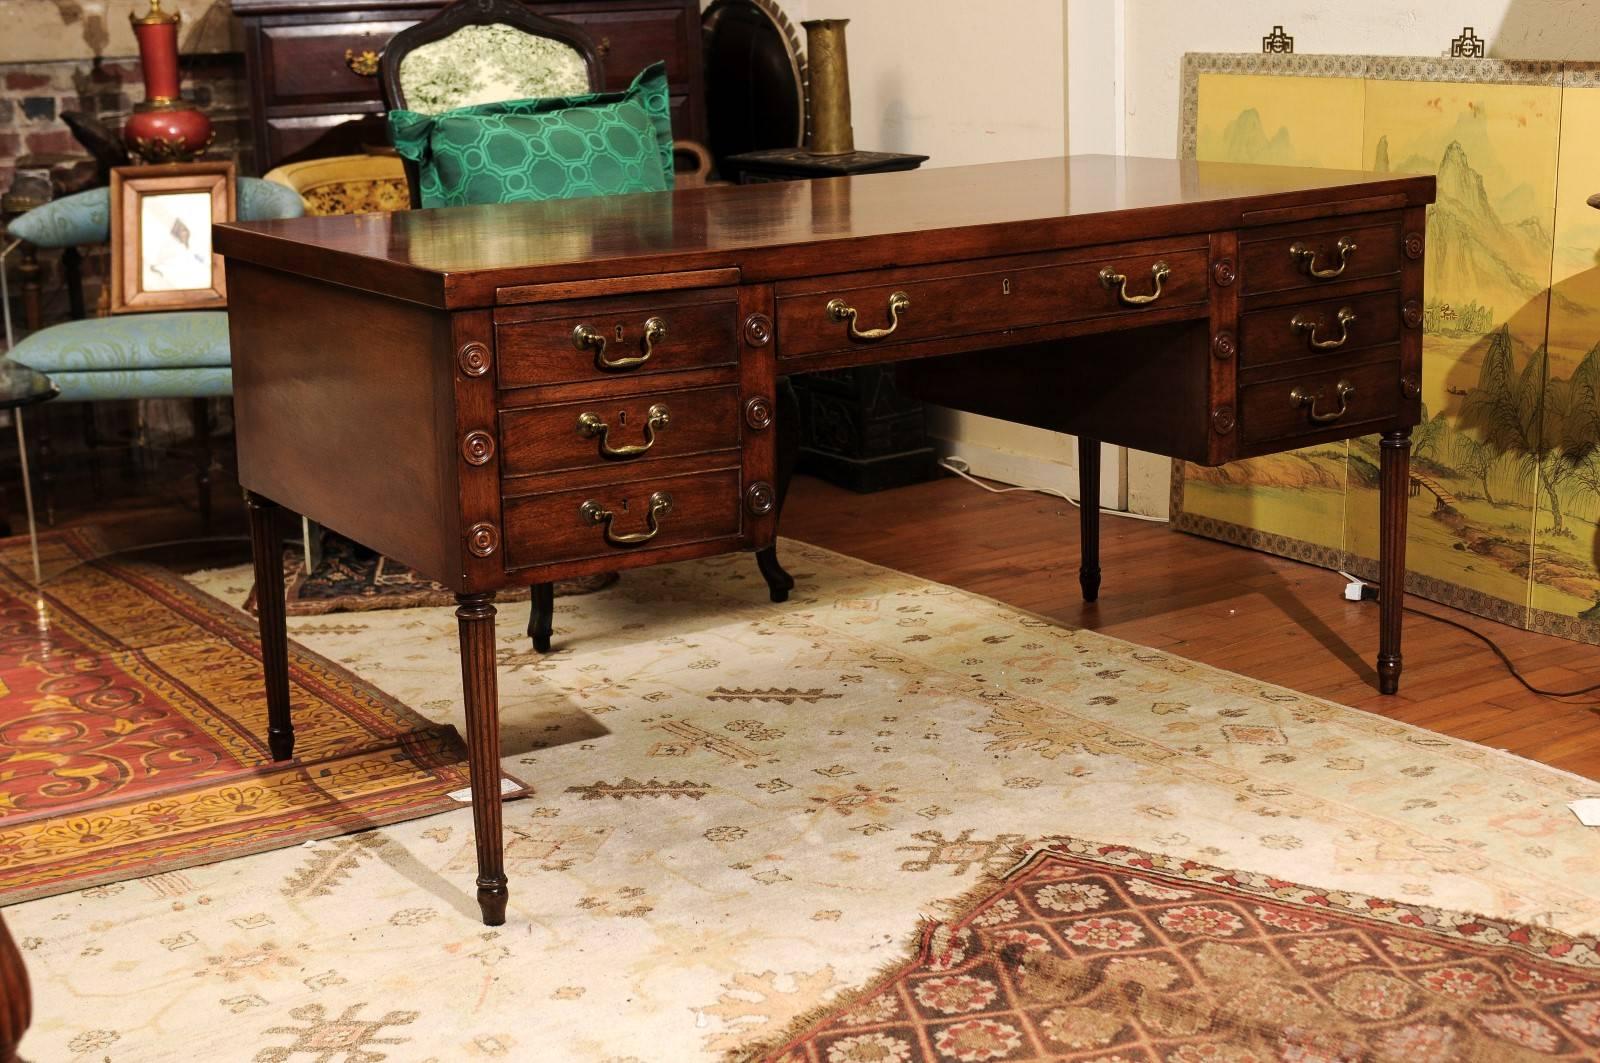 20th Century partners' desk of mahogany made in the Regency style and having a solid mahogany one board tabletop. The desk front has a wide center drawer (with working lock and key) flanked on each side by a wooden pull-out writing surface above one